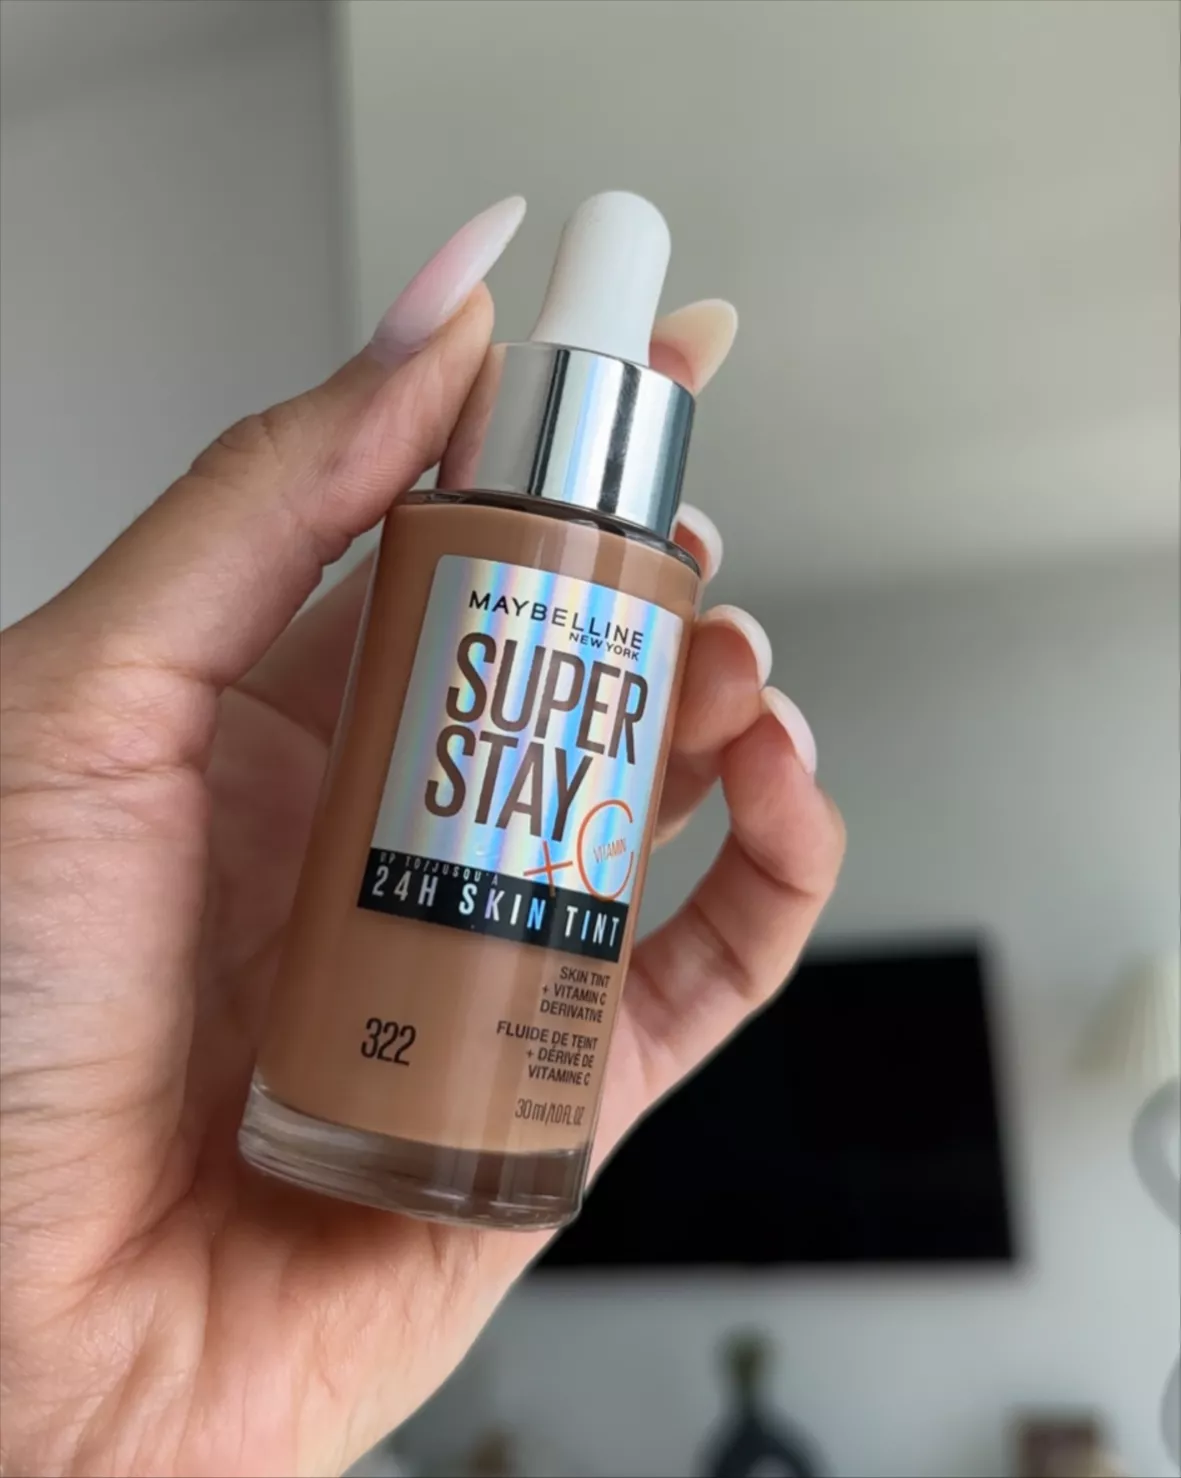 Stay Skin curated LTK 24HR Maybelline … on Super